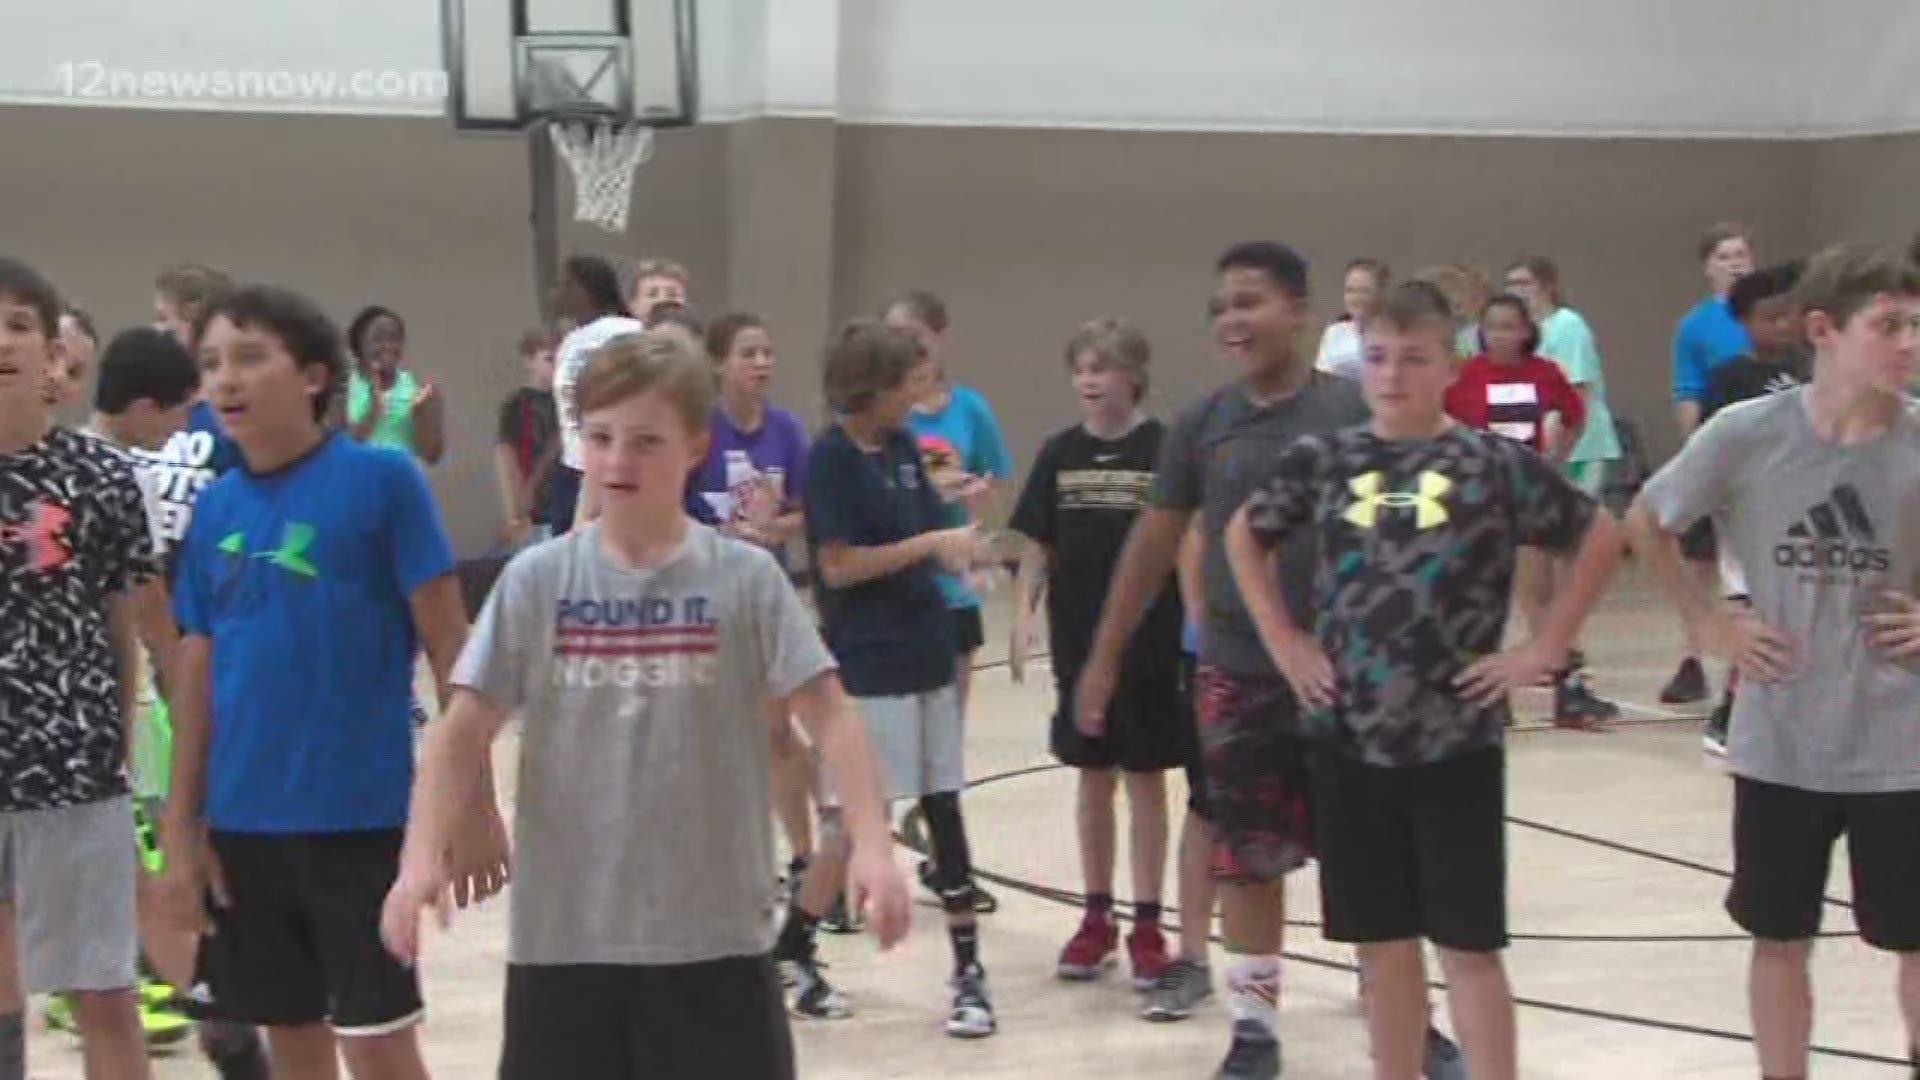 This fun, fundamental camp is based on Christian values and basketball knowledge